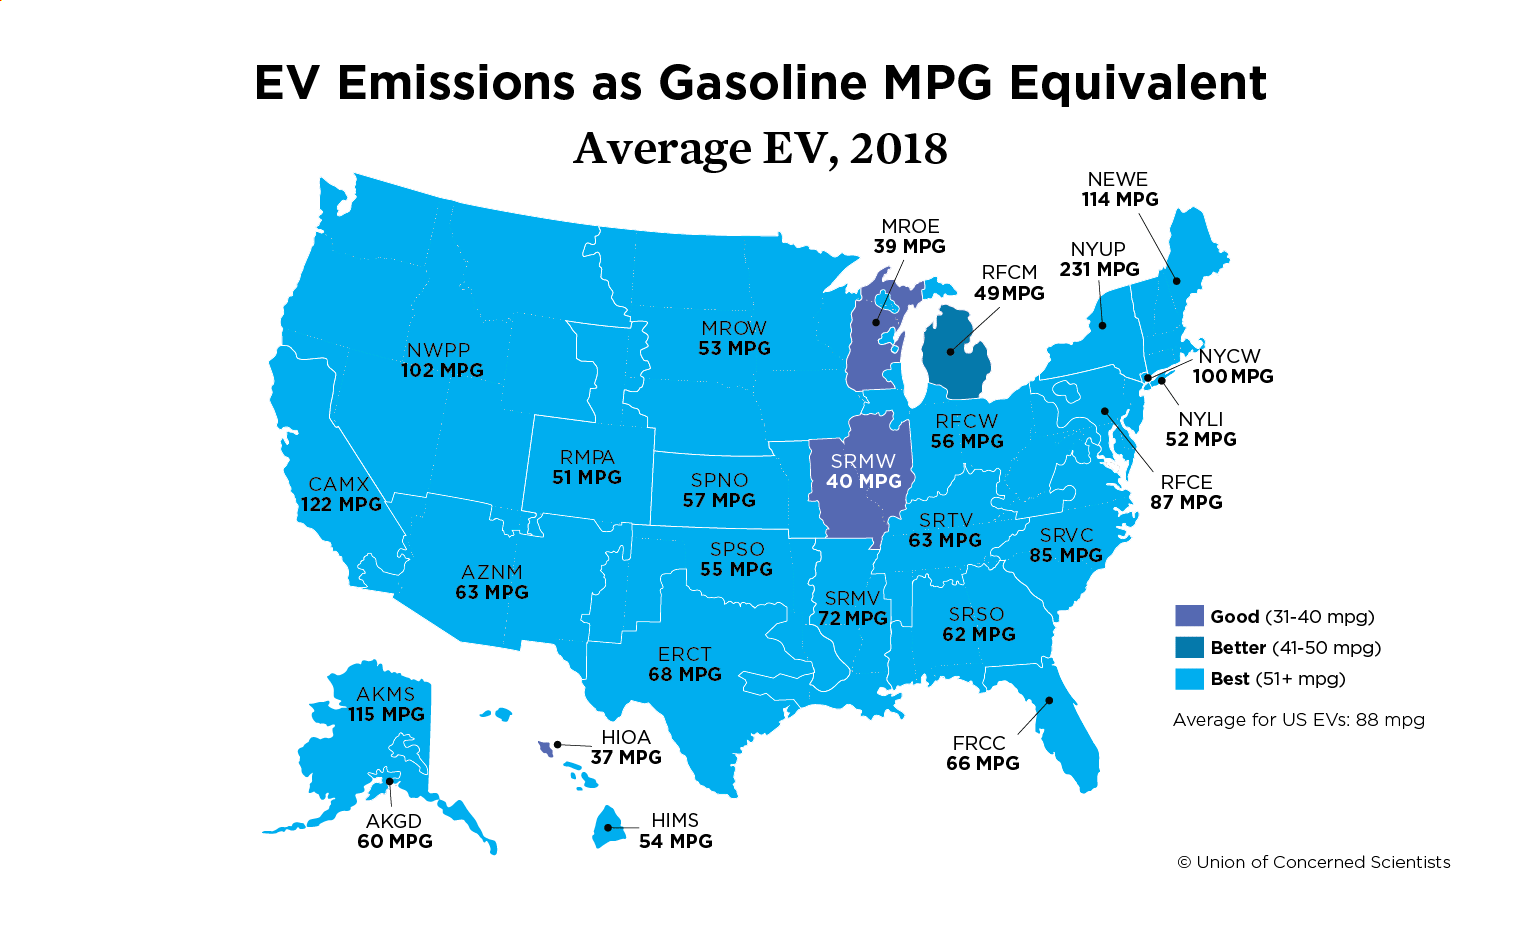 Map of the US and EV emissions as gasoline MPG equivalents